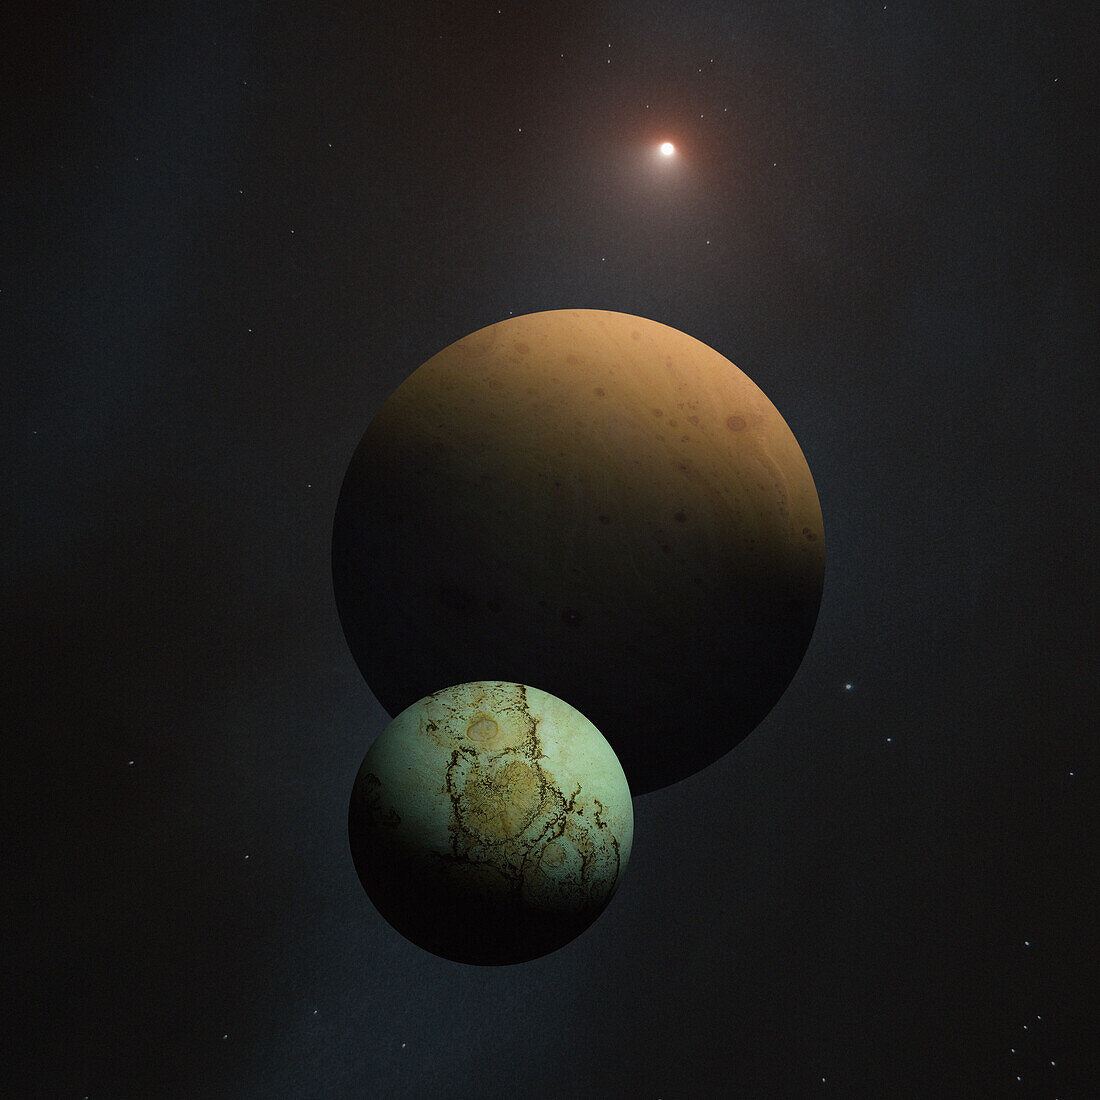 Exoplanets and star, composite image